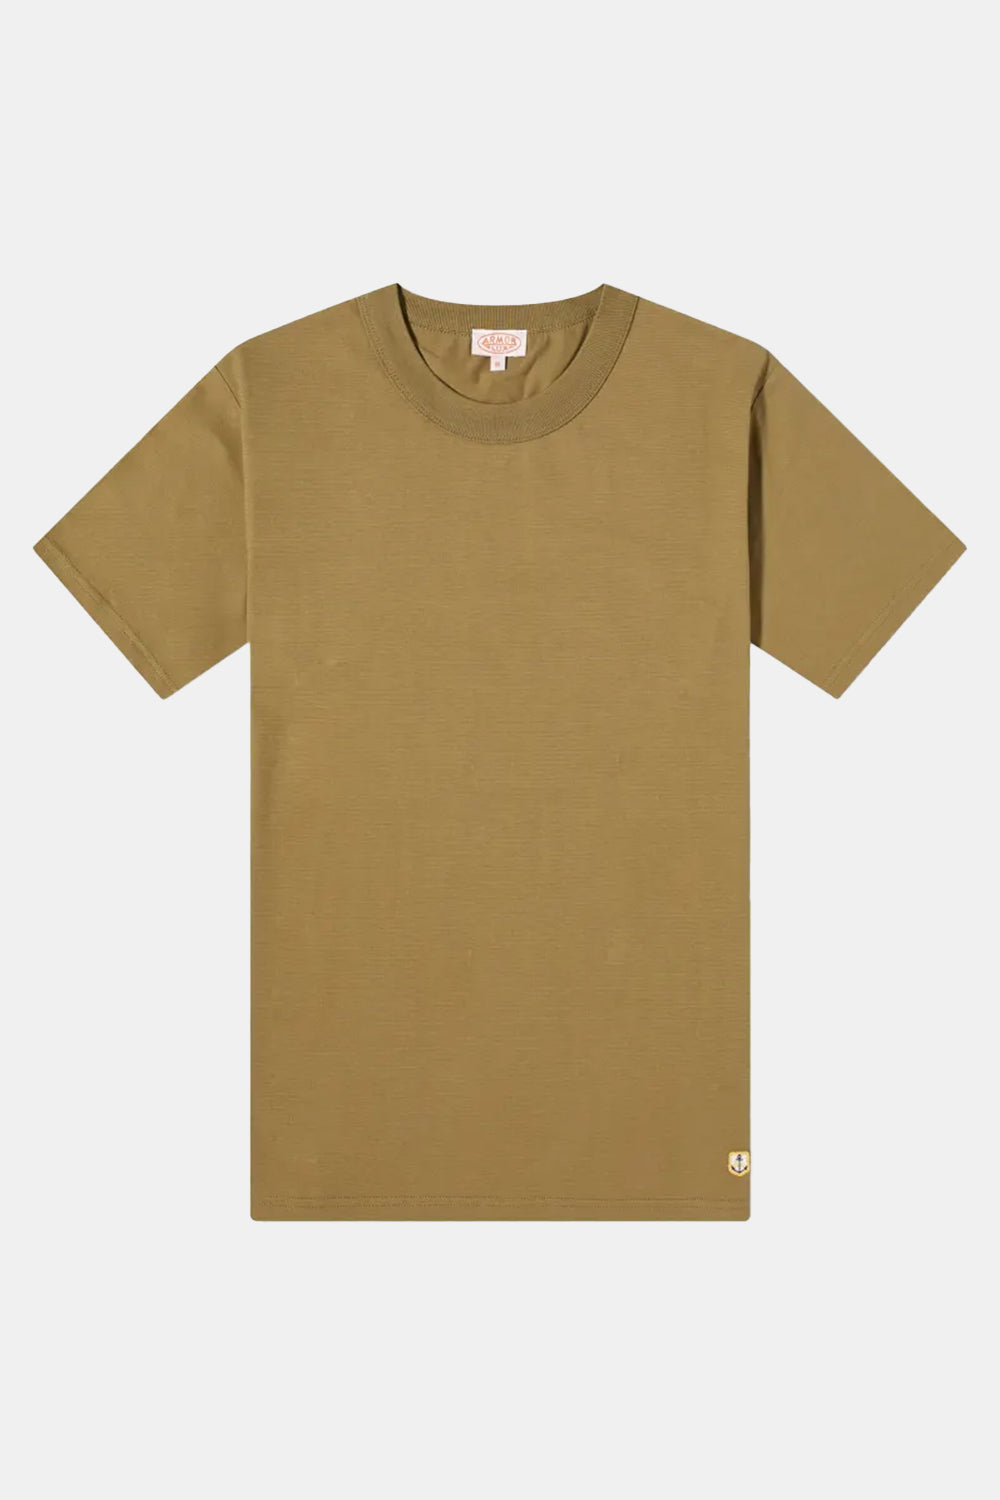 Armor Lux Heritage Organic Callac T-Shirt (Olive)
